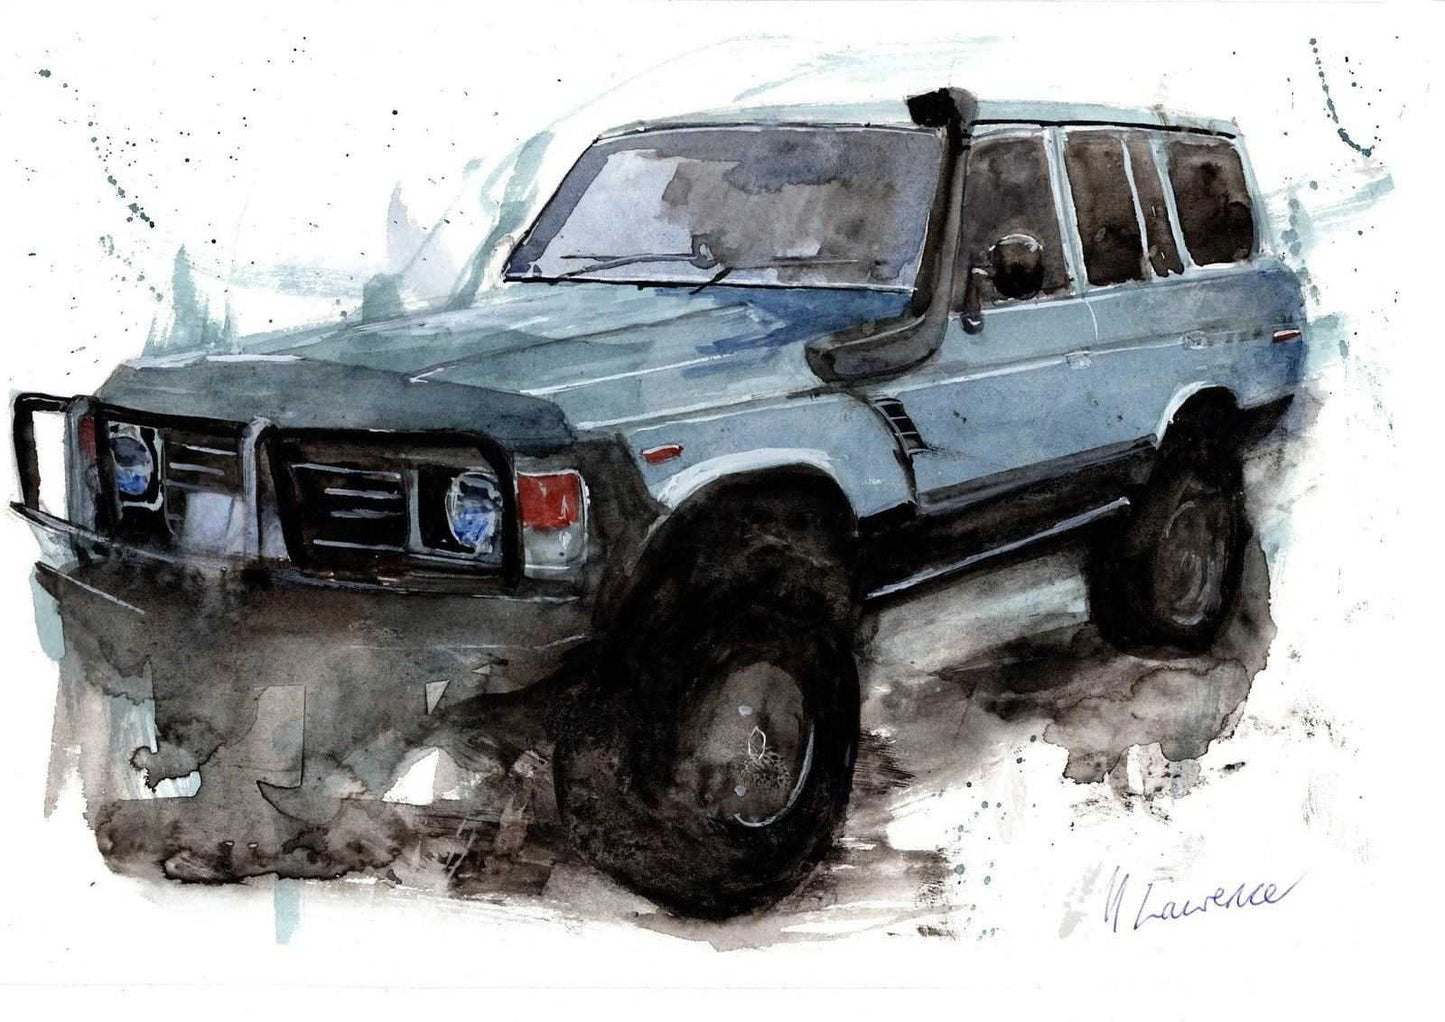 Car and Truck watercolour commissions. Have a portrait of your car, truck or suv done Limited Print By artist Myles Laurence watercolor ArtbyMyleslaurence